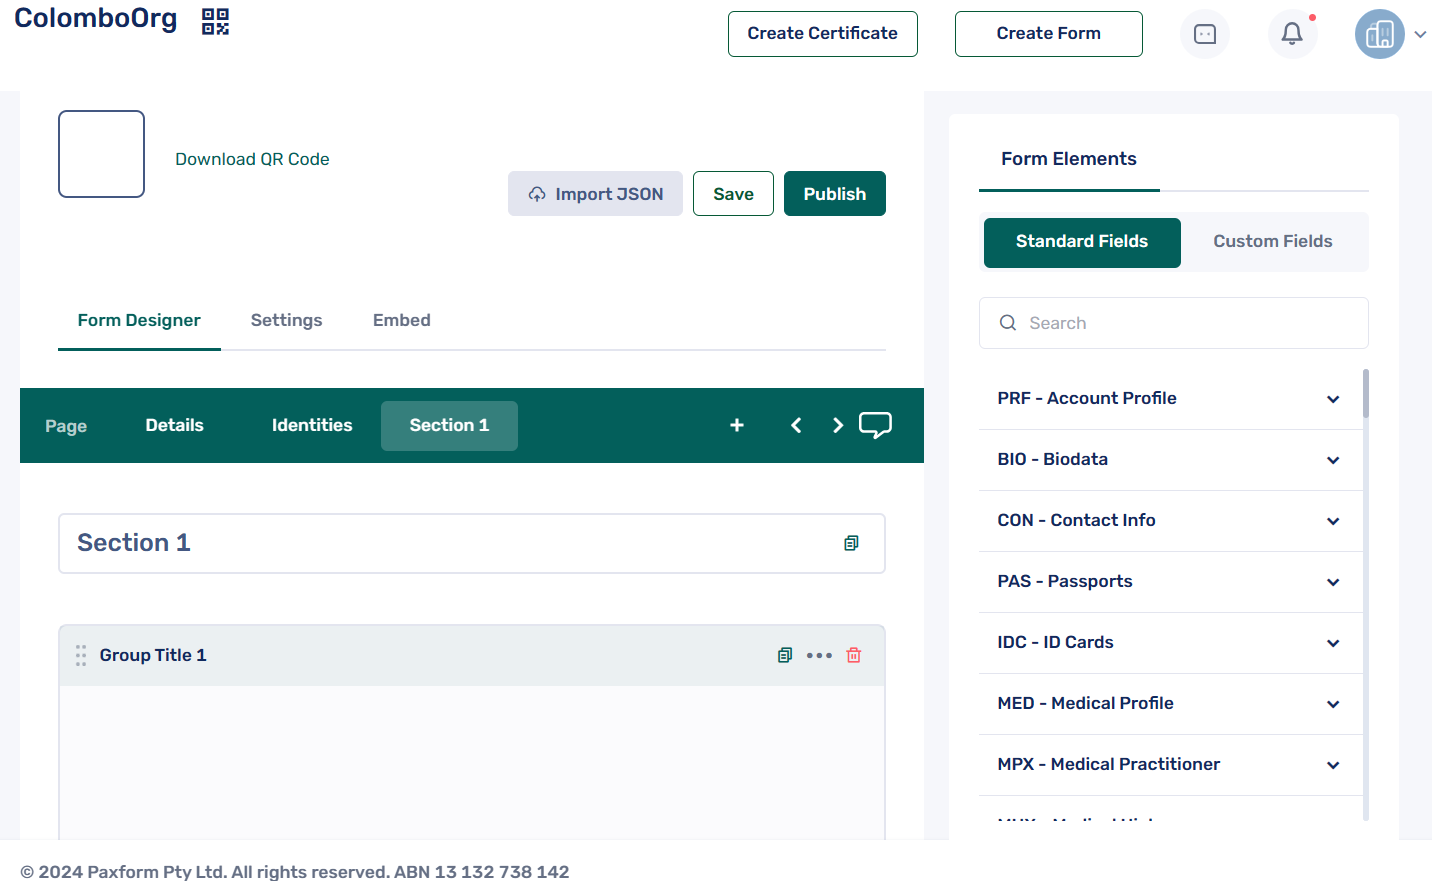 The screenshot shows the from creation, Paxform provides an easy-to-use form-building tool with already setup 'Standard Fields' for multiple industries and 'Custom Fields' for customised data inputs by the company.